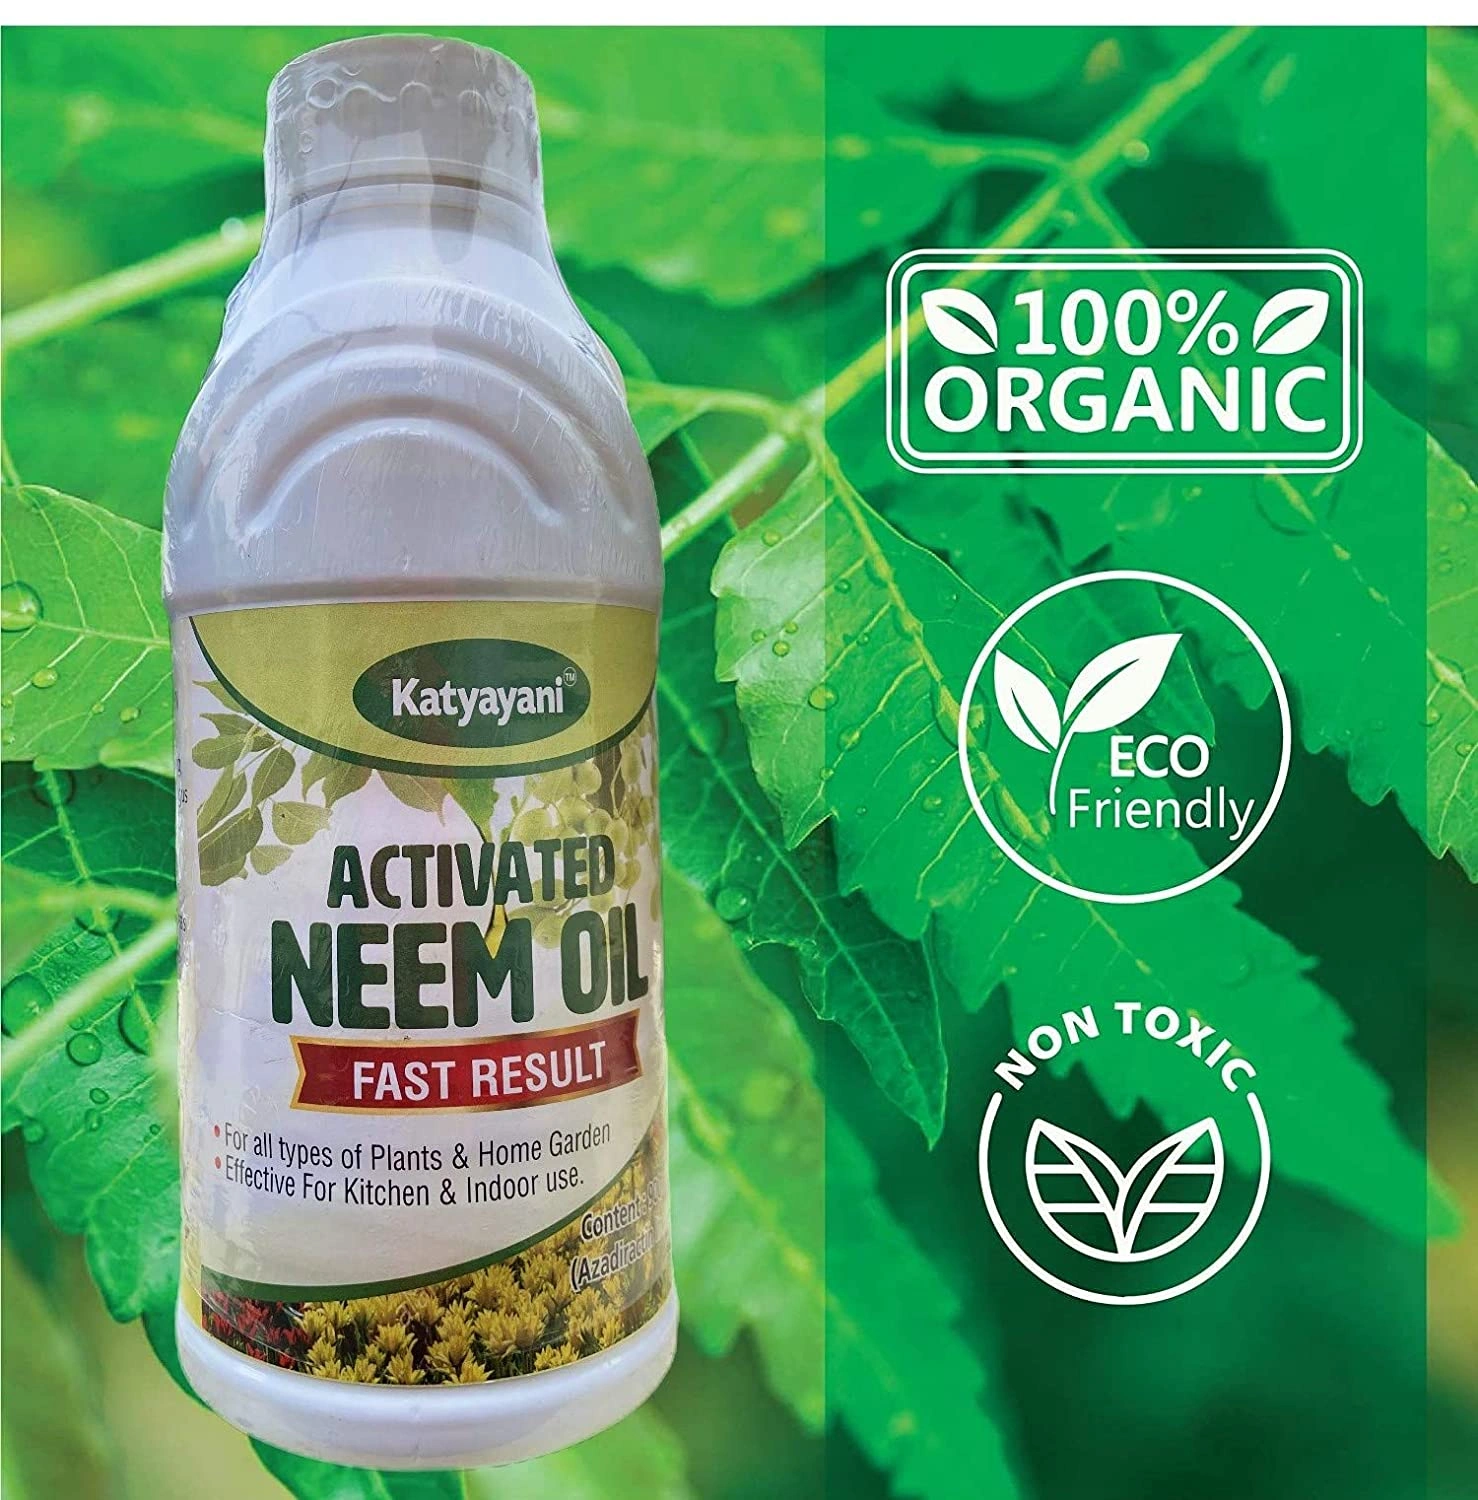 Katyayani Activated Neem Oil for Plants Garden Kitchen Insect Spray Pest Control Organic Azadirachtin Pesticide Fast Results-2